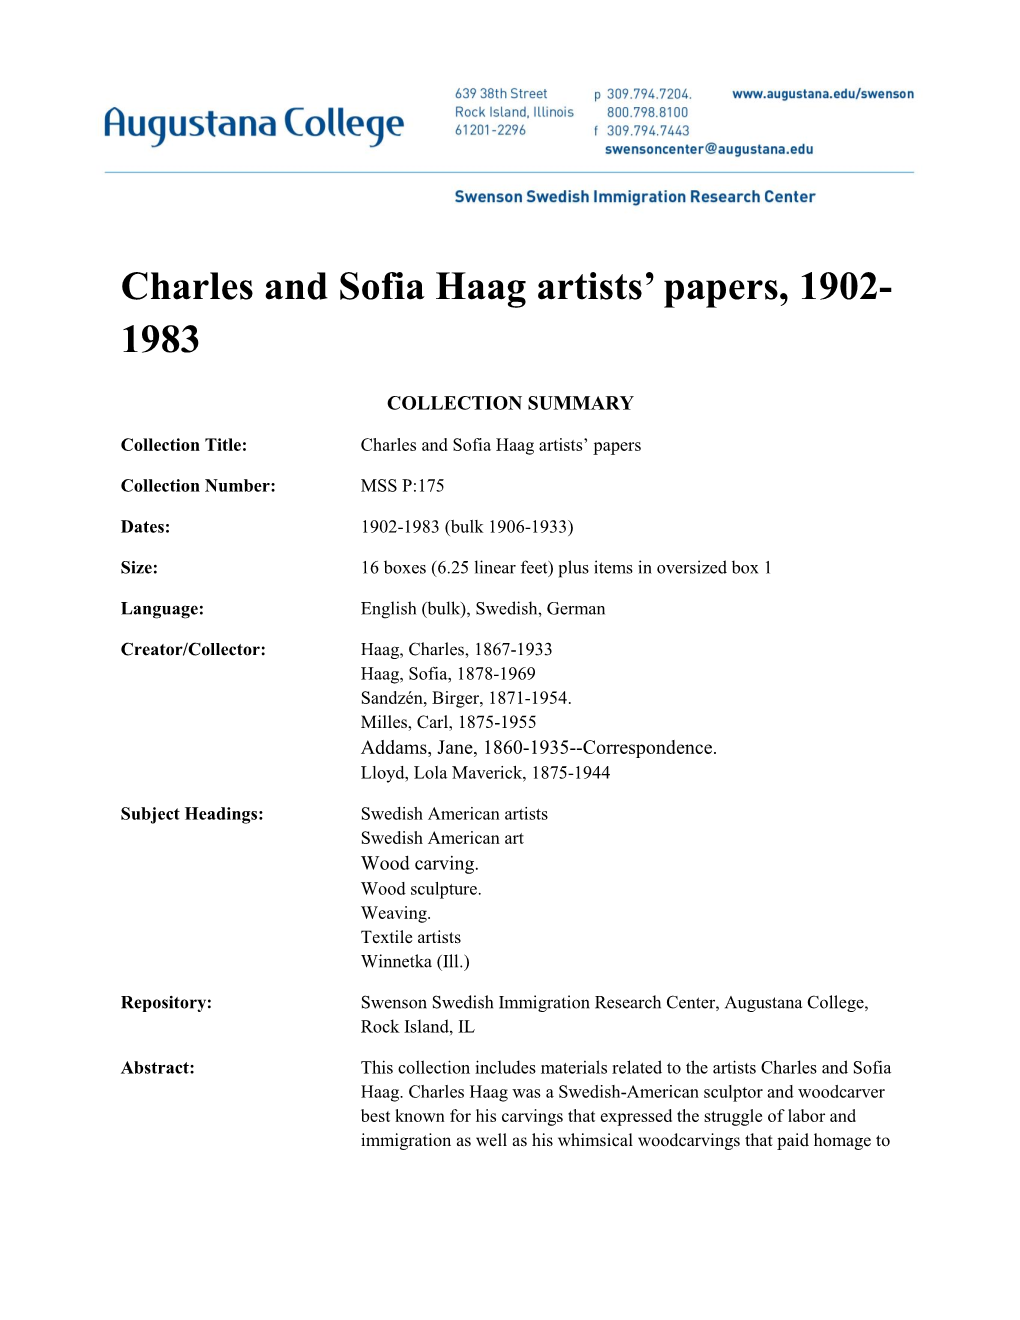 Charles and Sofia Haag Artists' Papers, 1902